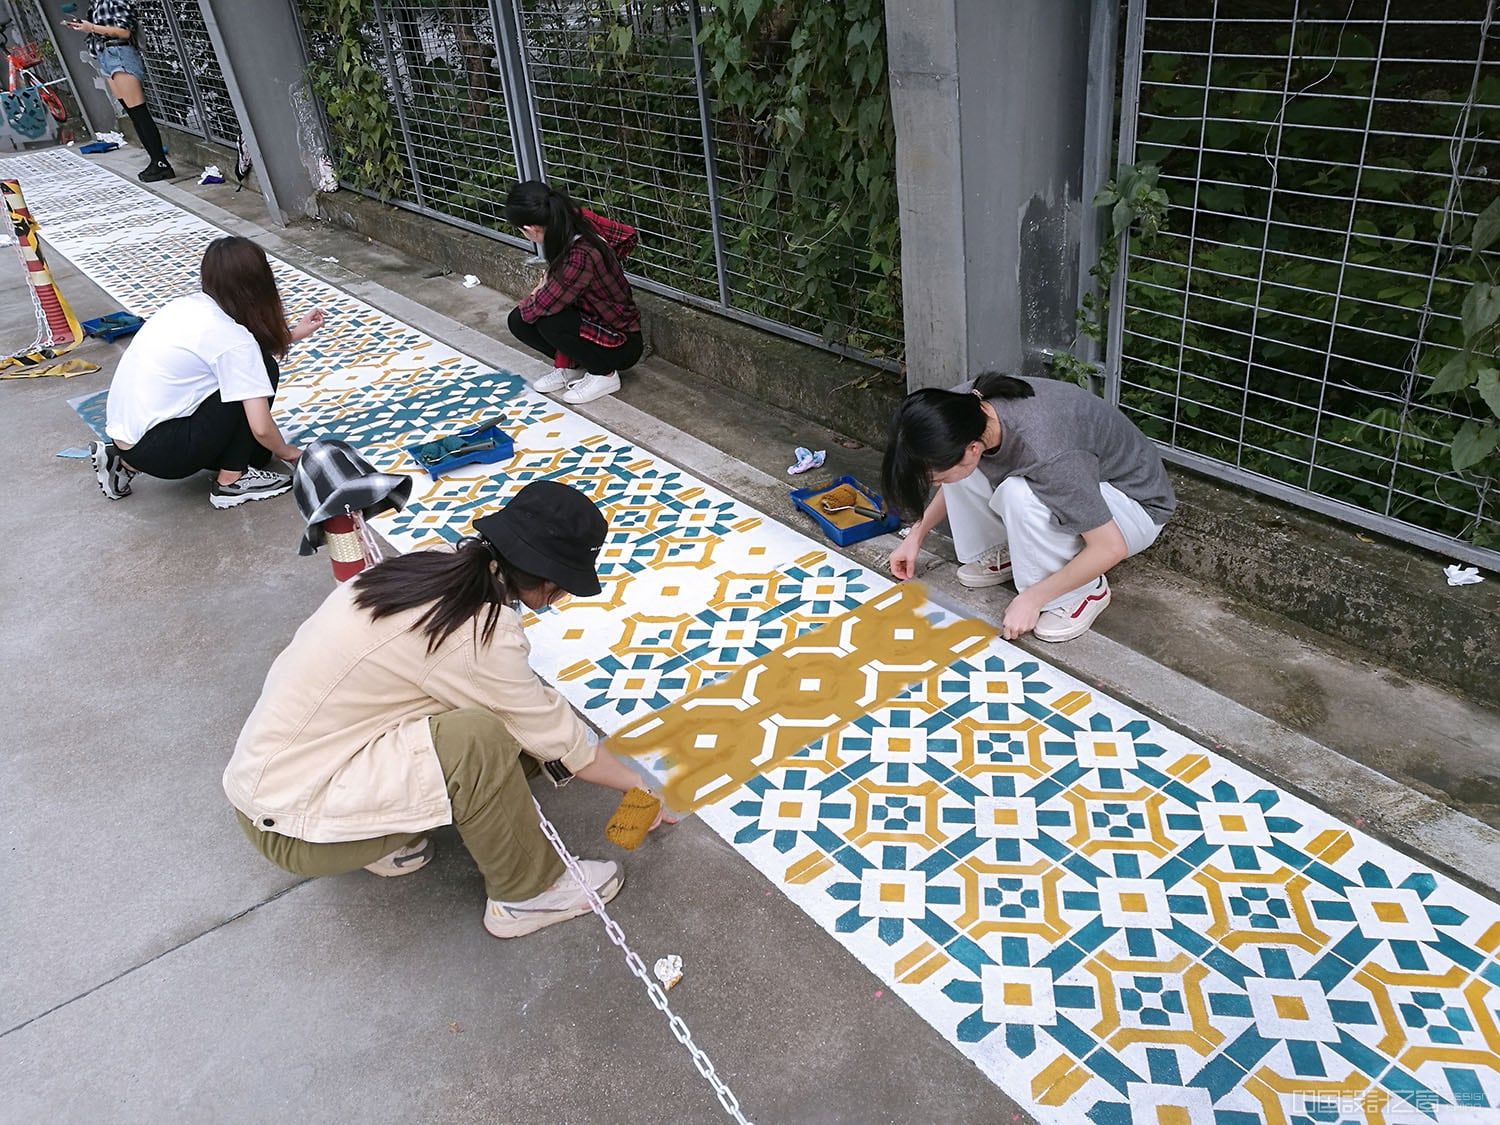 A photo of people painting a vibrant patterned rug-like intervention on the co<em></em>ncrete in a city